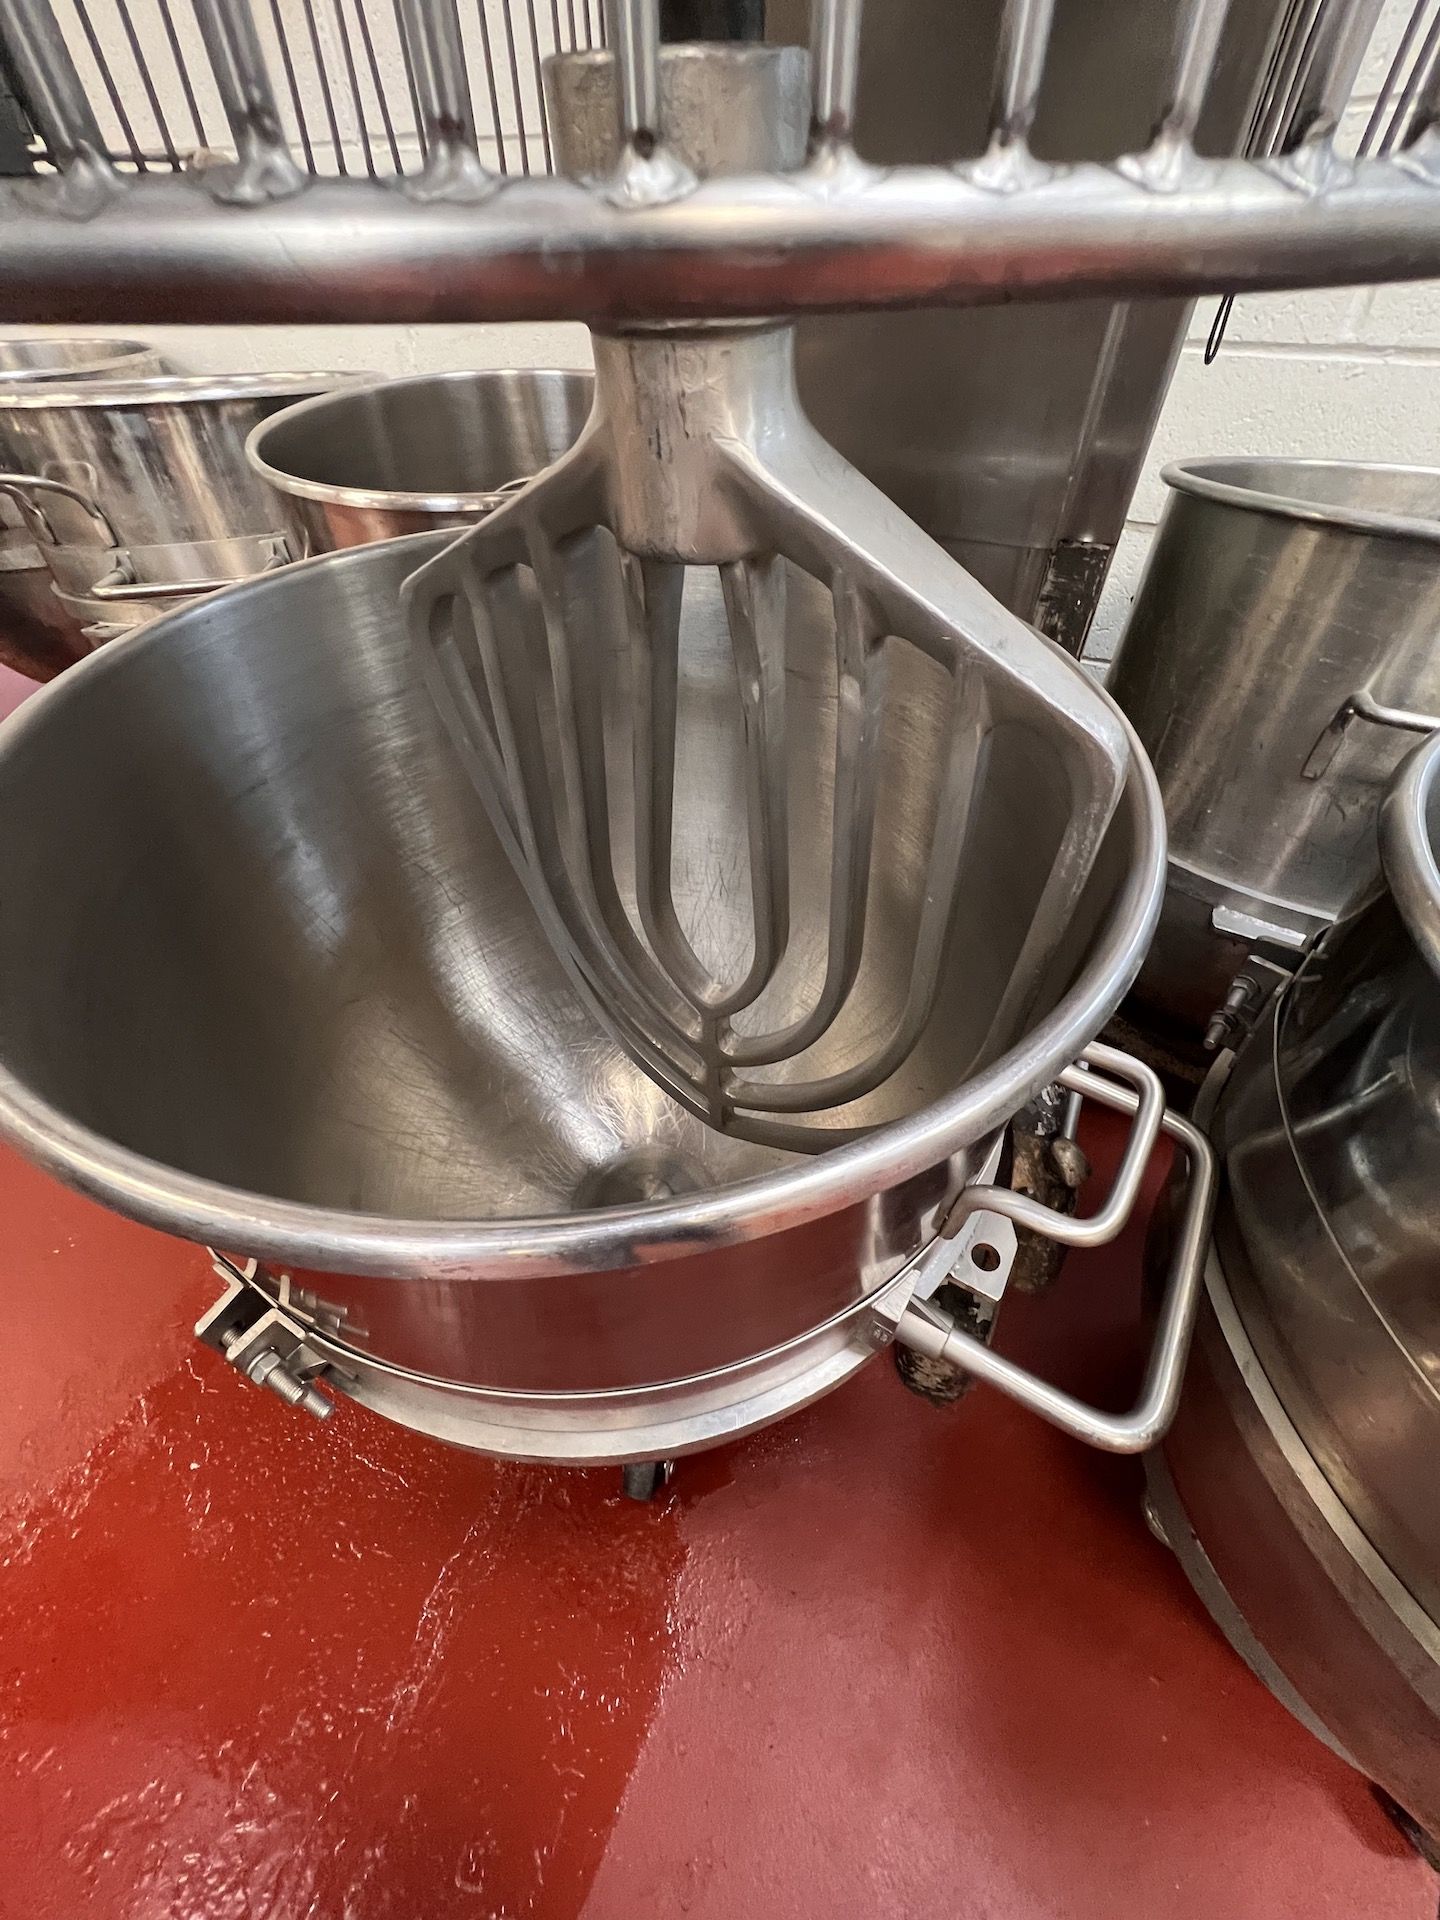 HOBART MIXER, MODEL Q1401, S/N 11-340-0, 140 QUART, WITH BEATER ATTACHMENT, MIXING BOWL AND DOLLY - Image 7 of 8